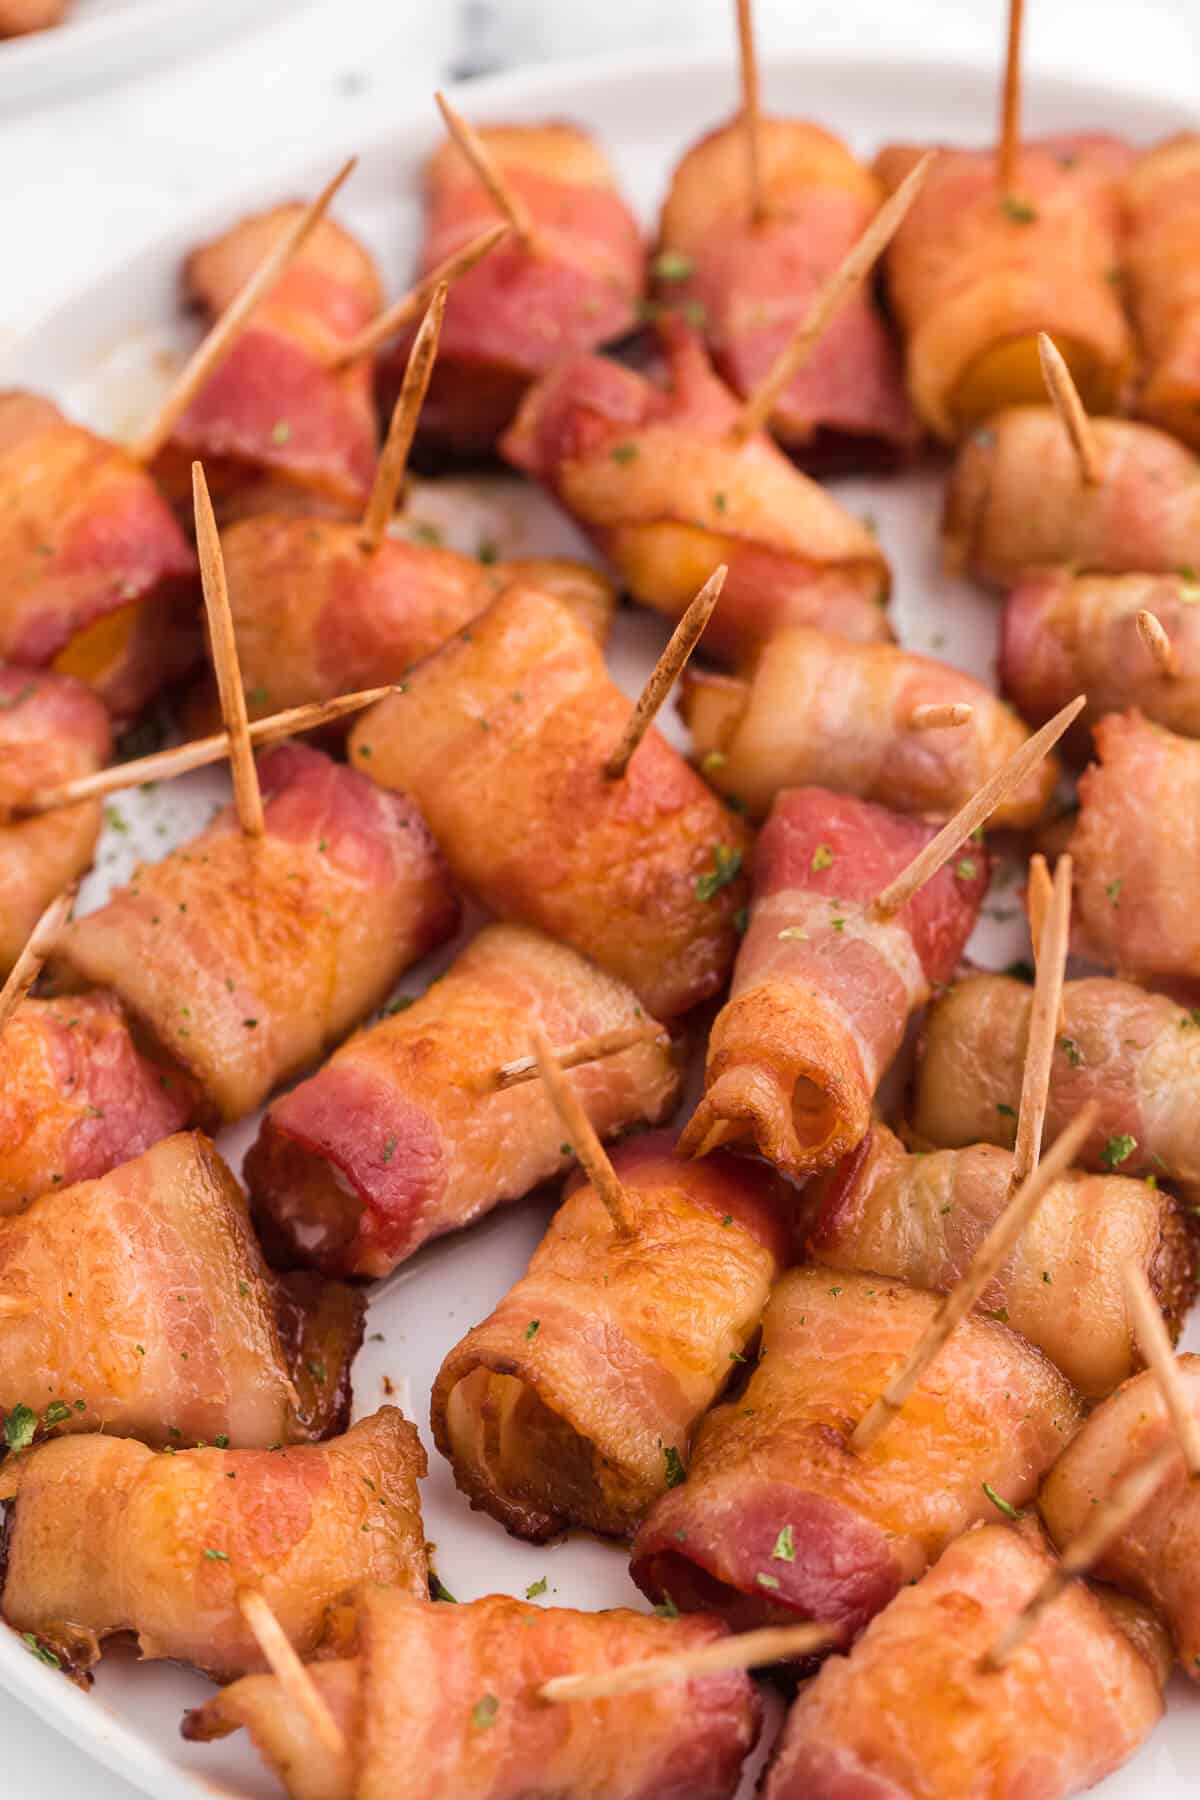 Bacon Wrapped Appetizers - Bite sized and addicting! Try four varieties - bacon wrapped water chestnuts, bacon wrapped smoked oysters, bacon wrapped pineapple and bacon wrapped olives.